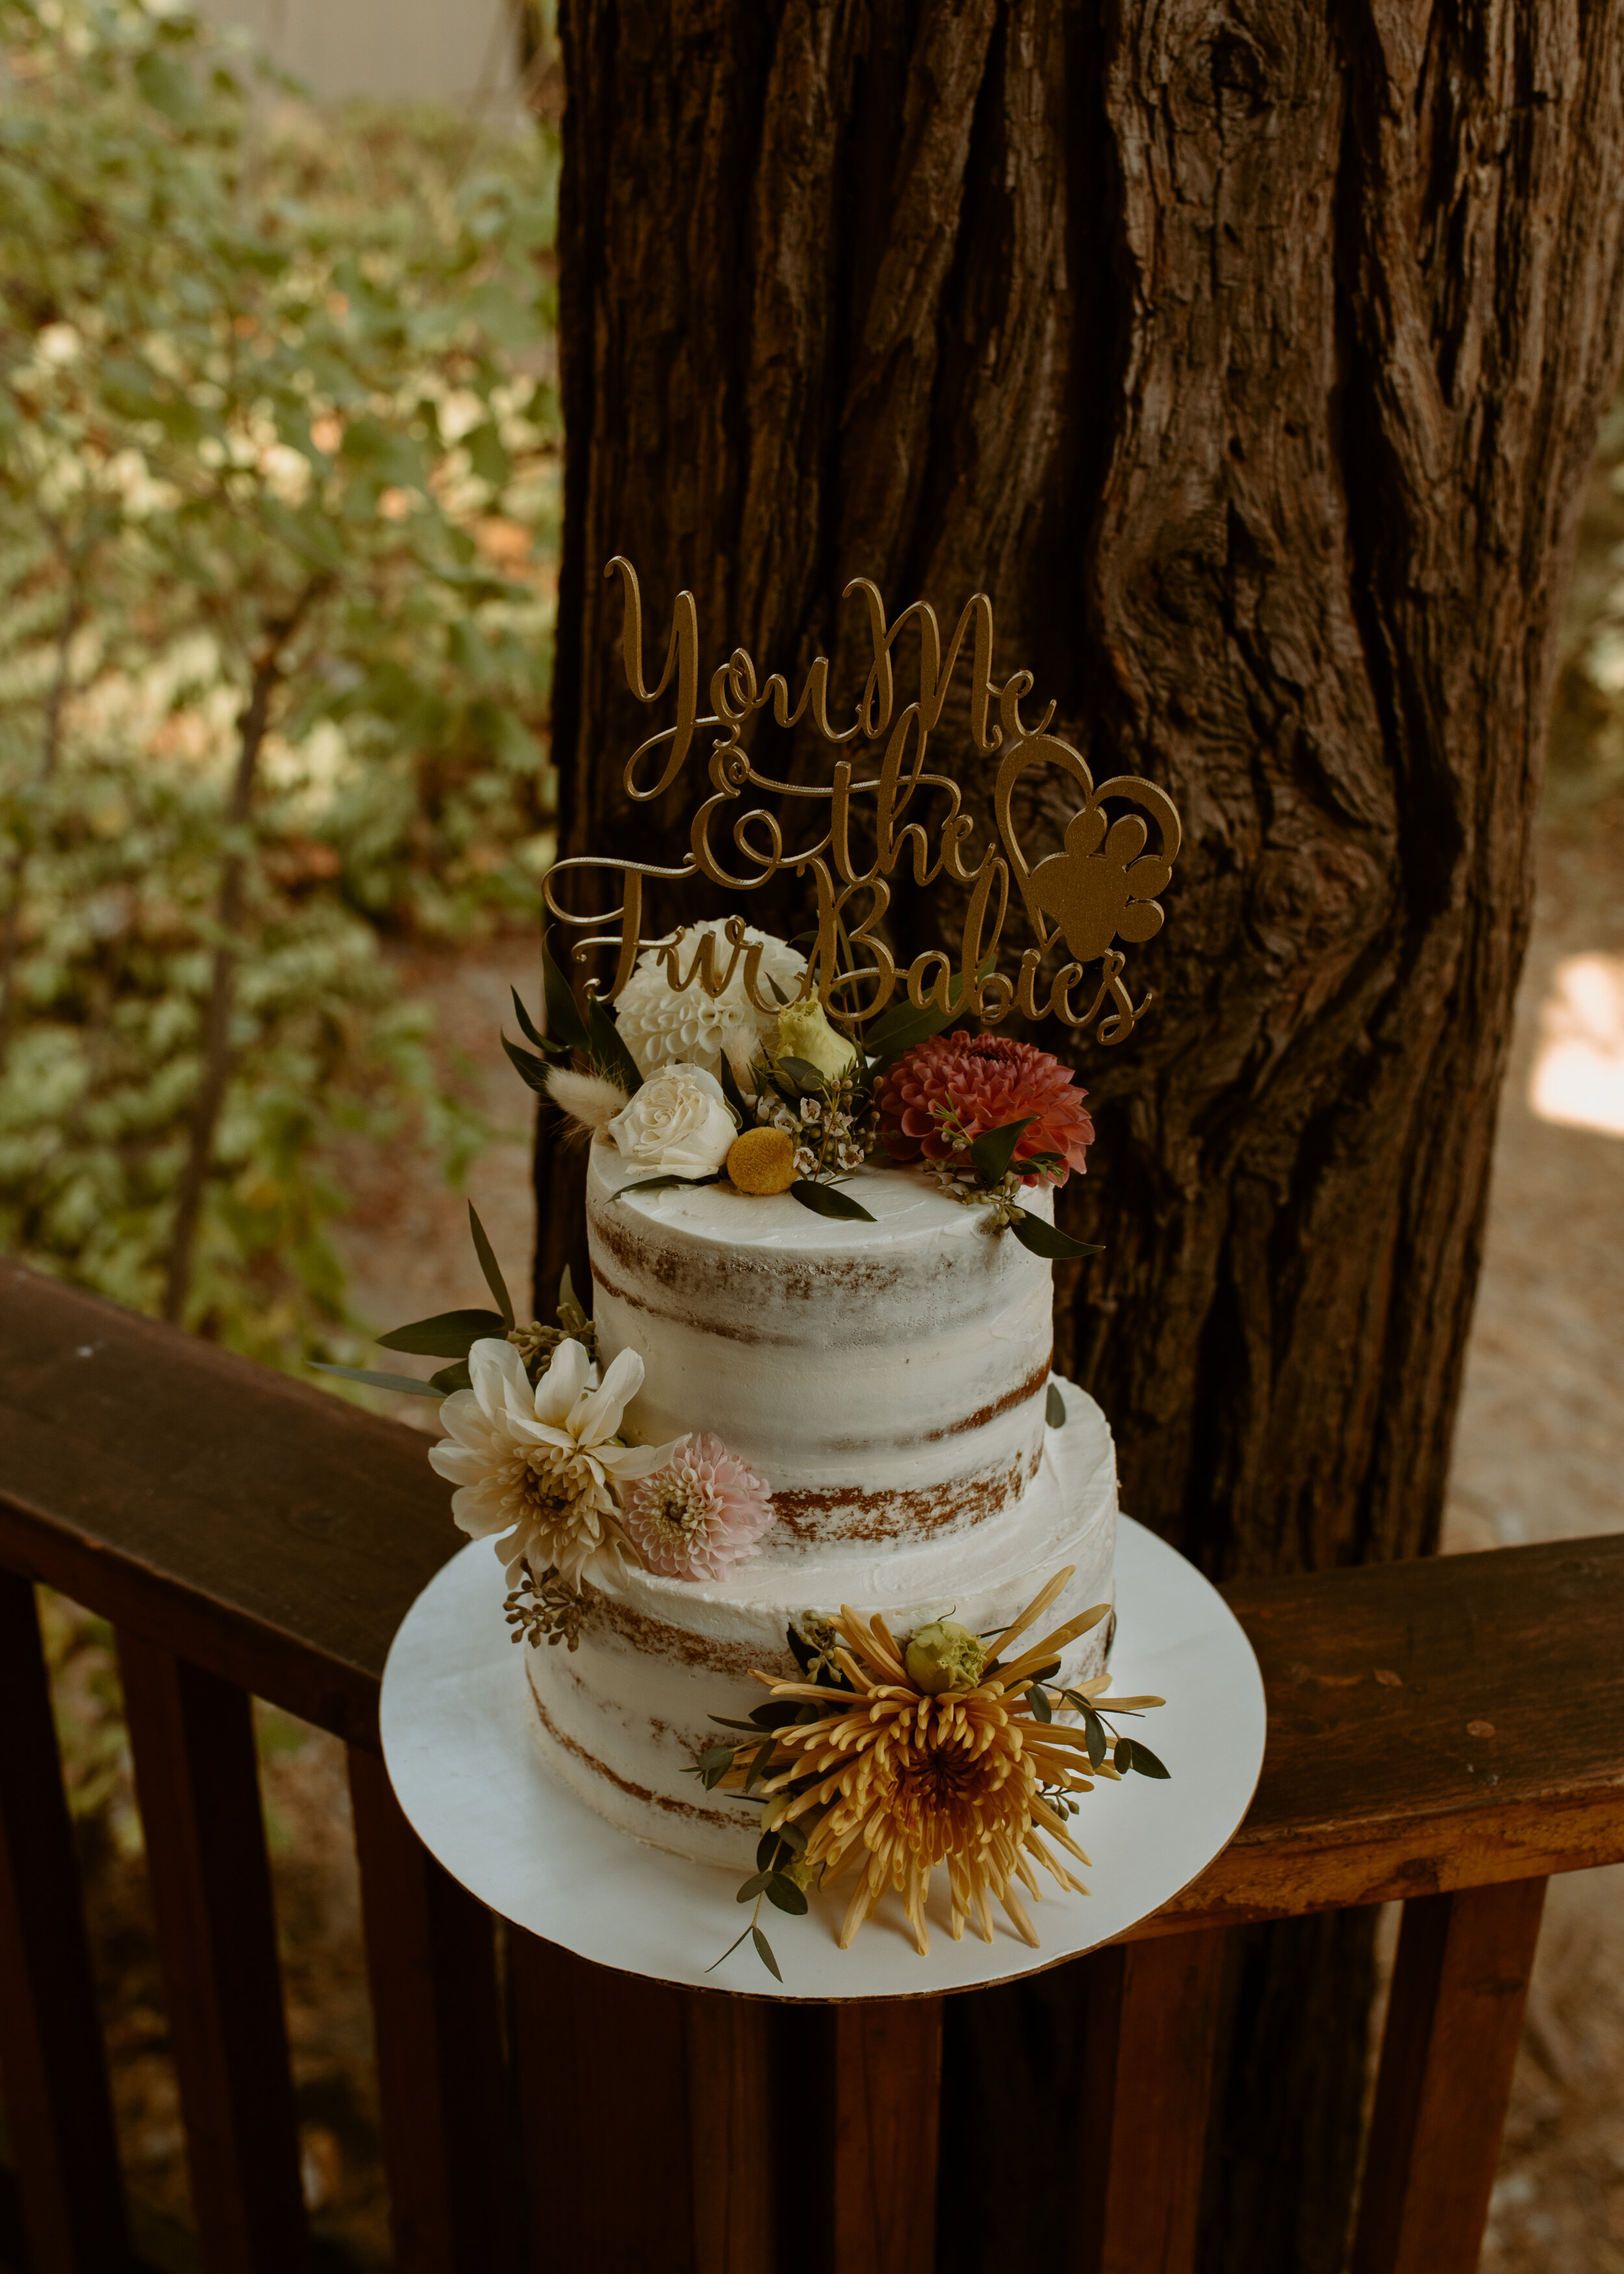 Yosemite Elopement | Wedding cake with cake topper that says "You Me and the Fur Babies"